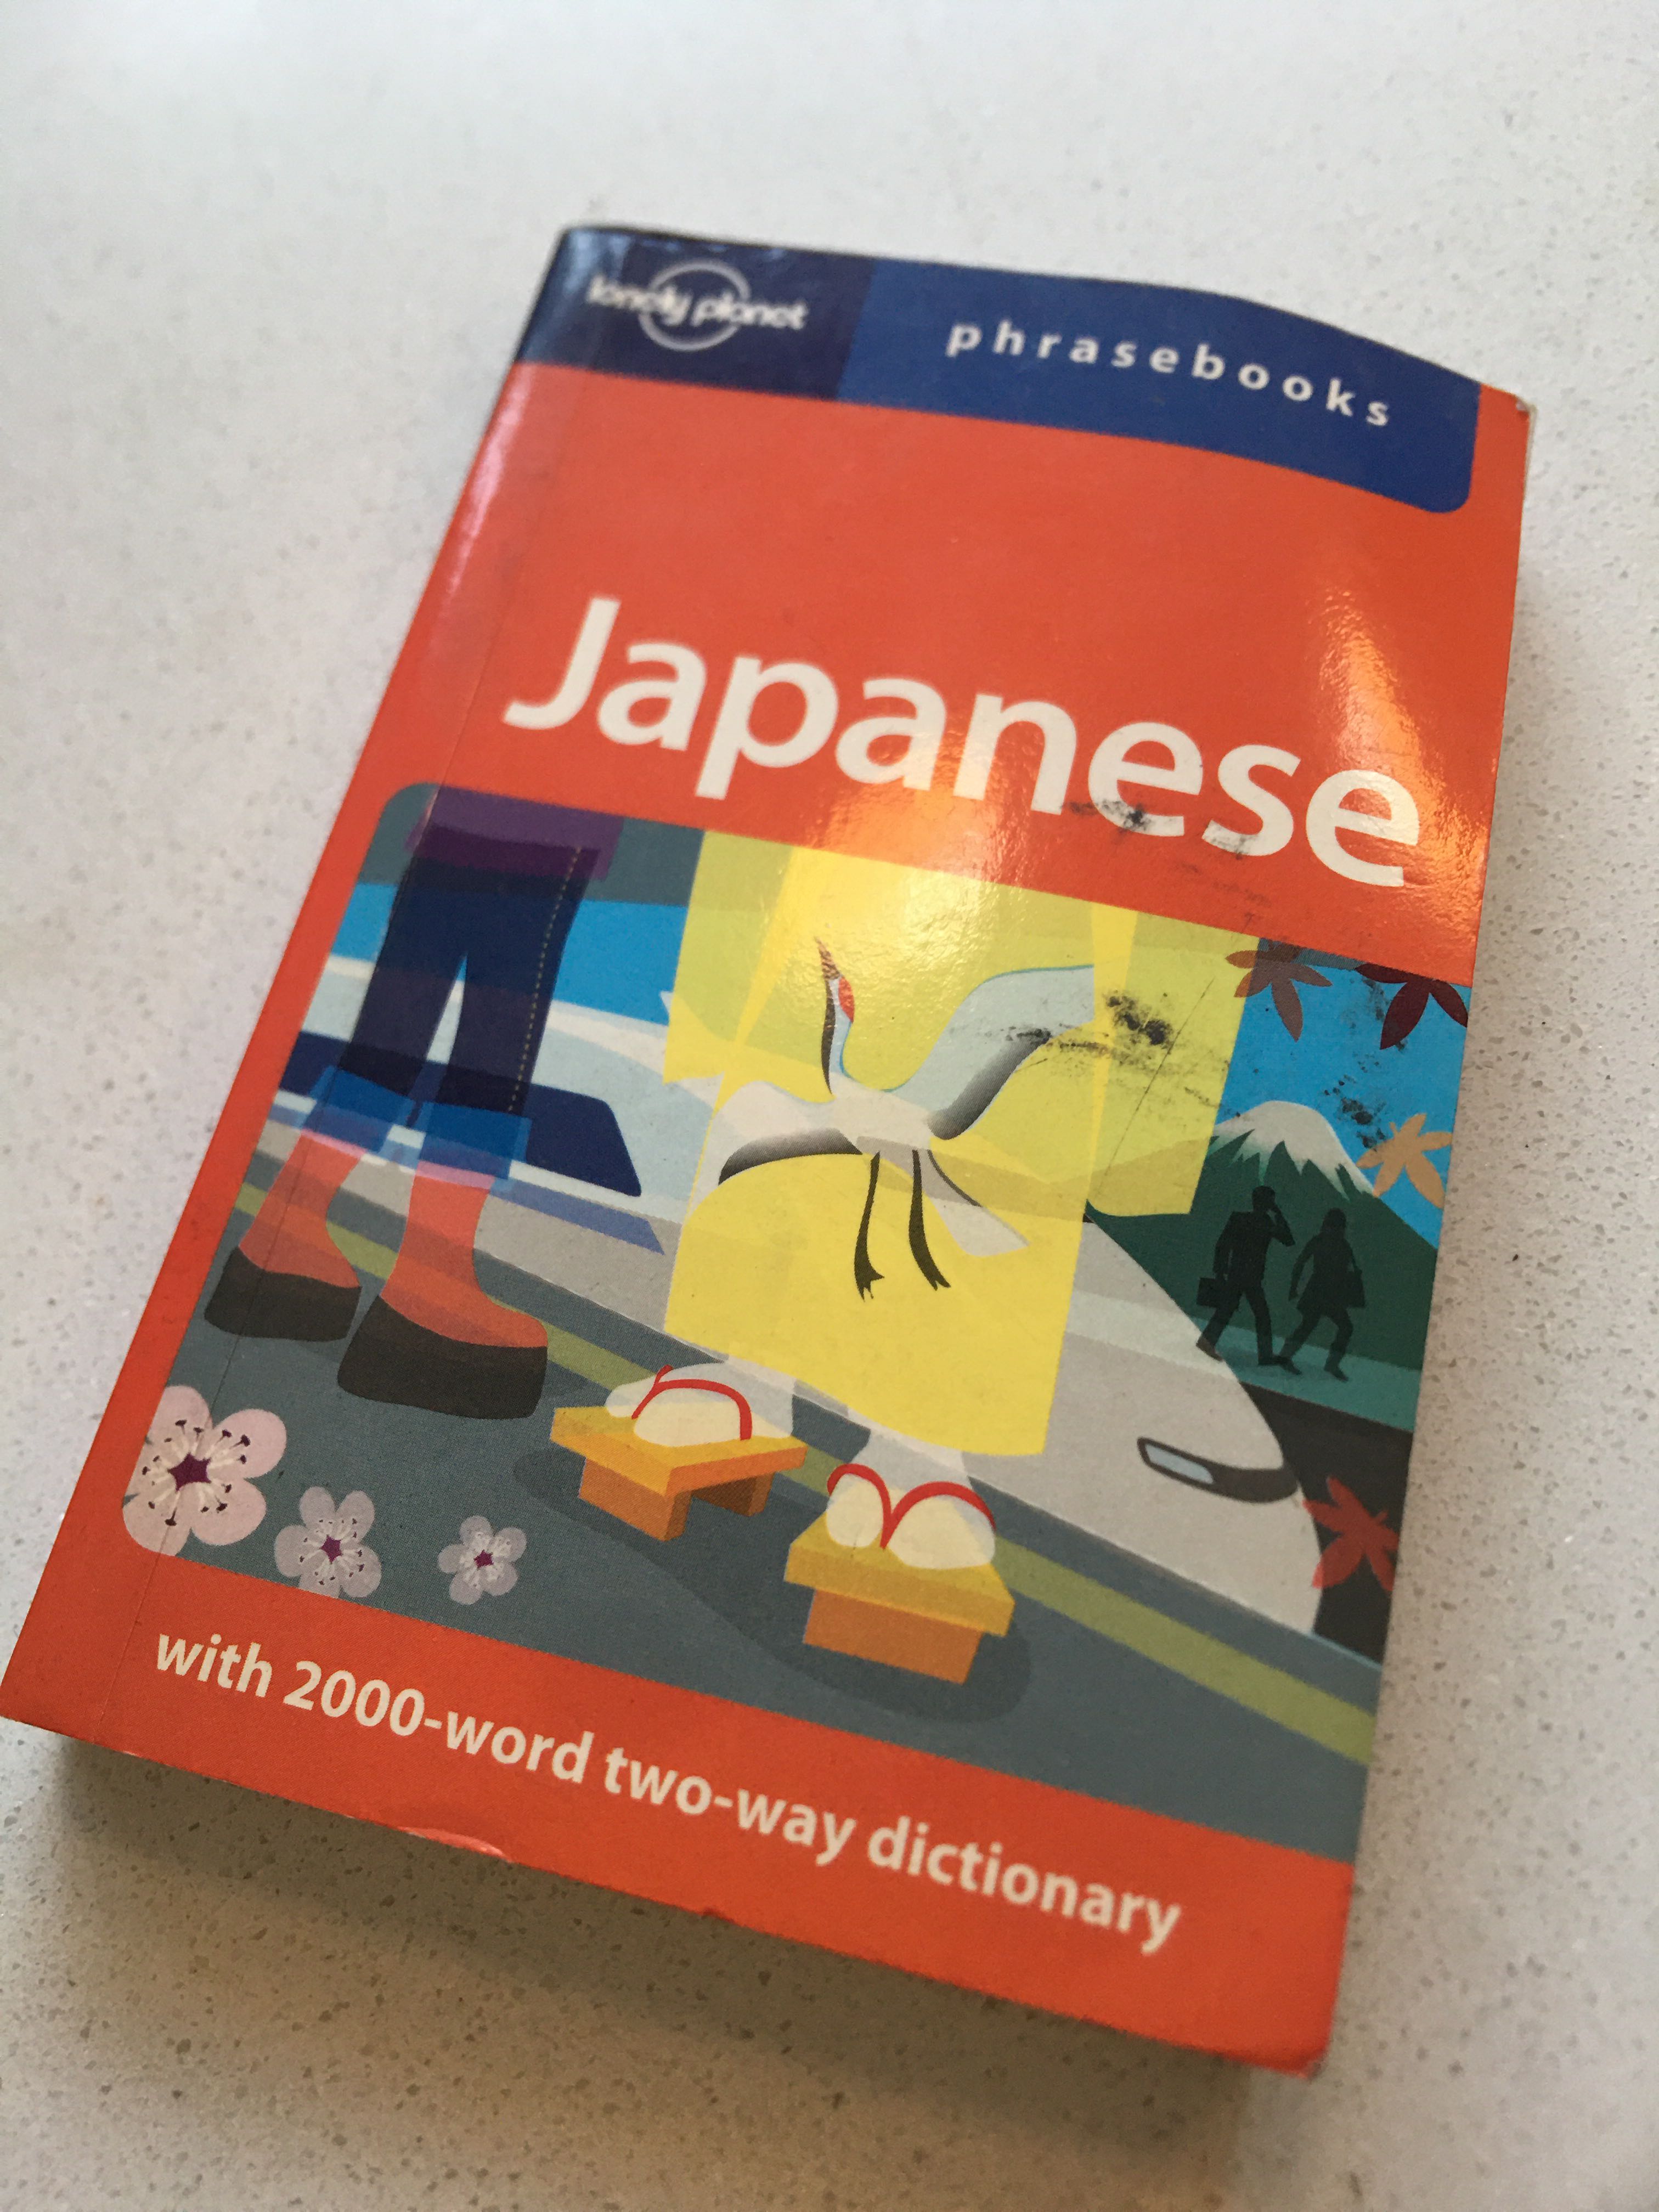 Toys,　on　Phrasebook,　Guides　Hobbies　Holiday　Travel　Magazines,　Books　Japanese　Carousell